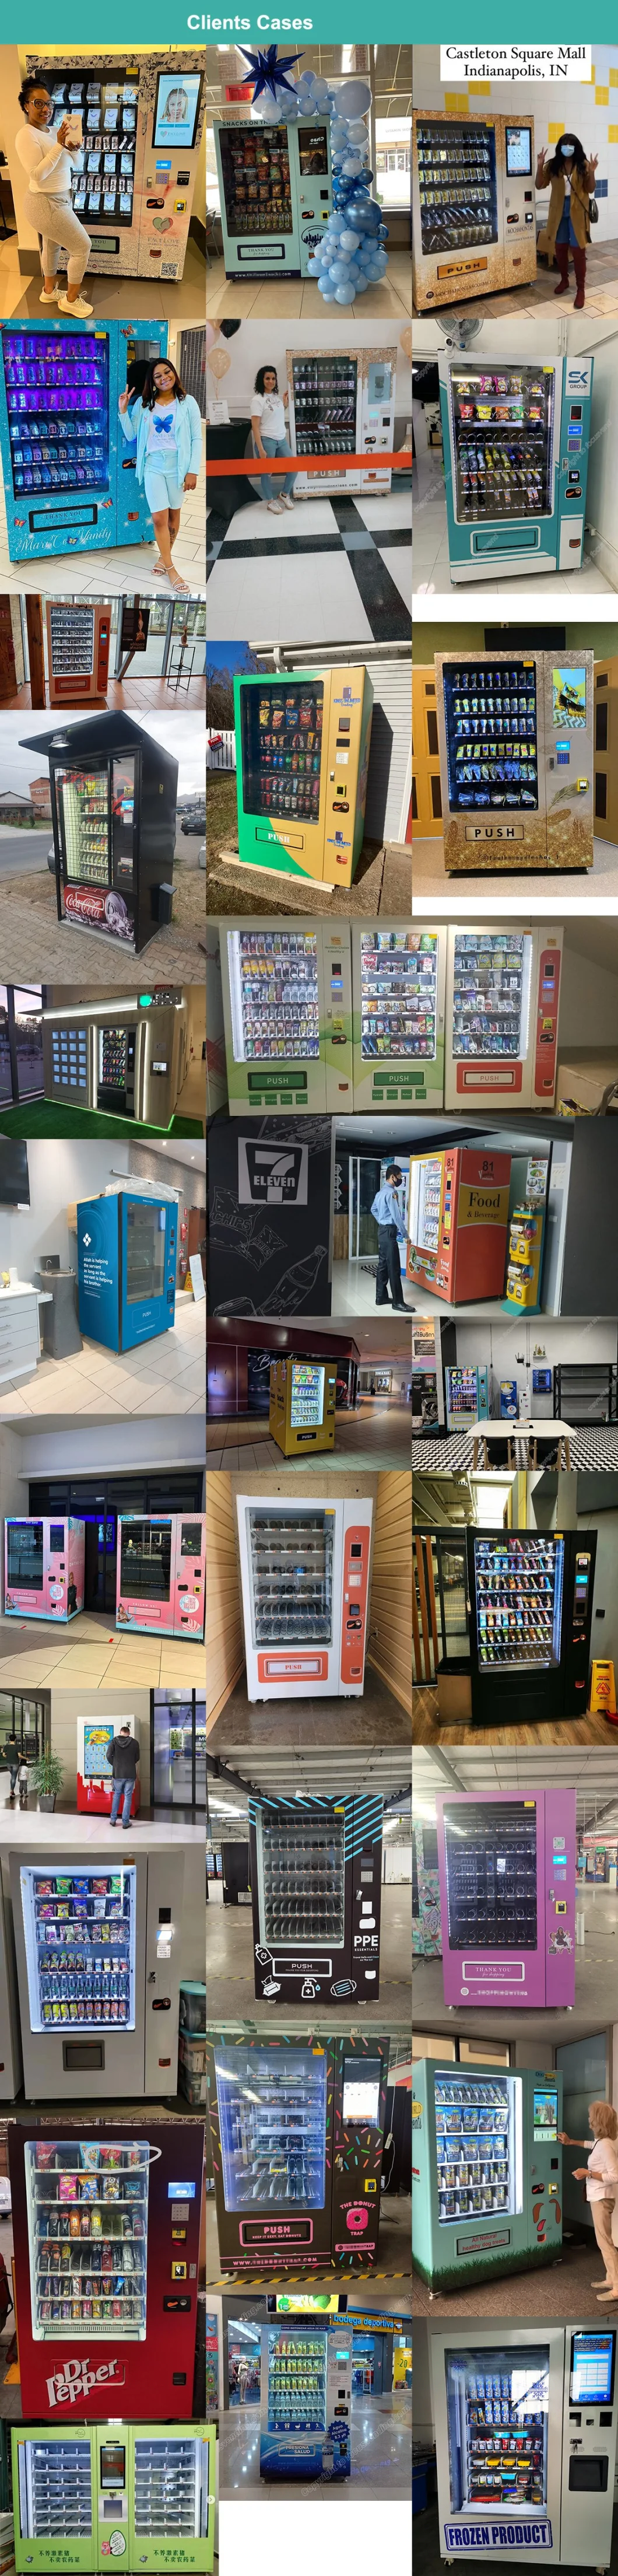 Customized Beauty Vending Machine for Makeup Nail Art Nails with Customized Wrap